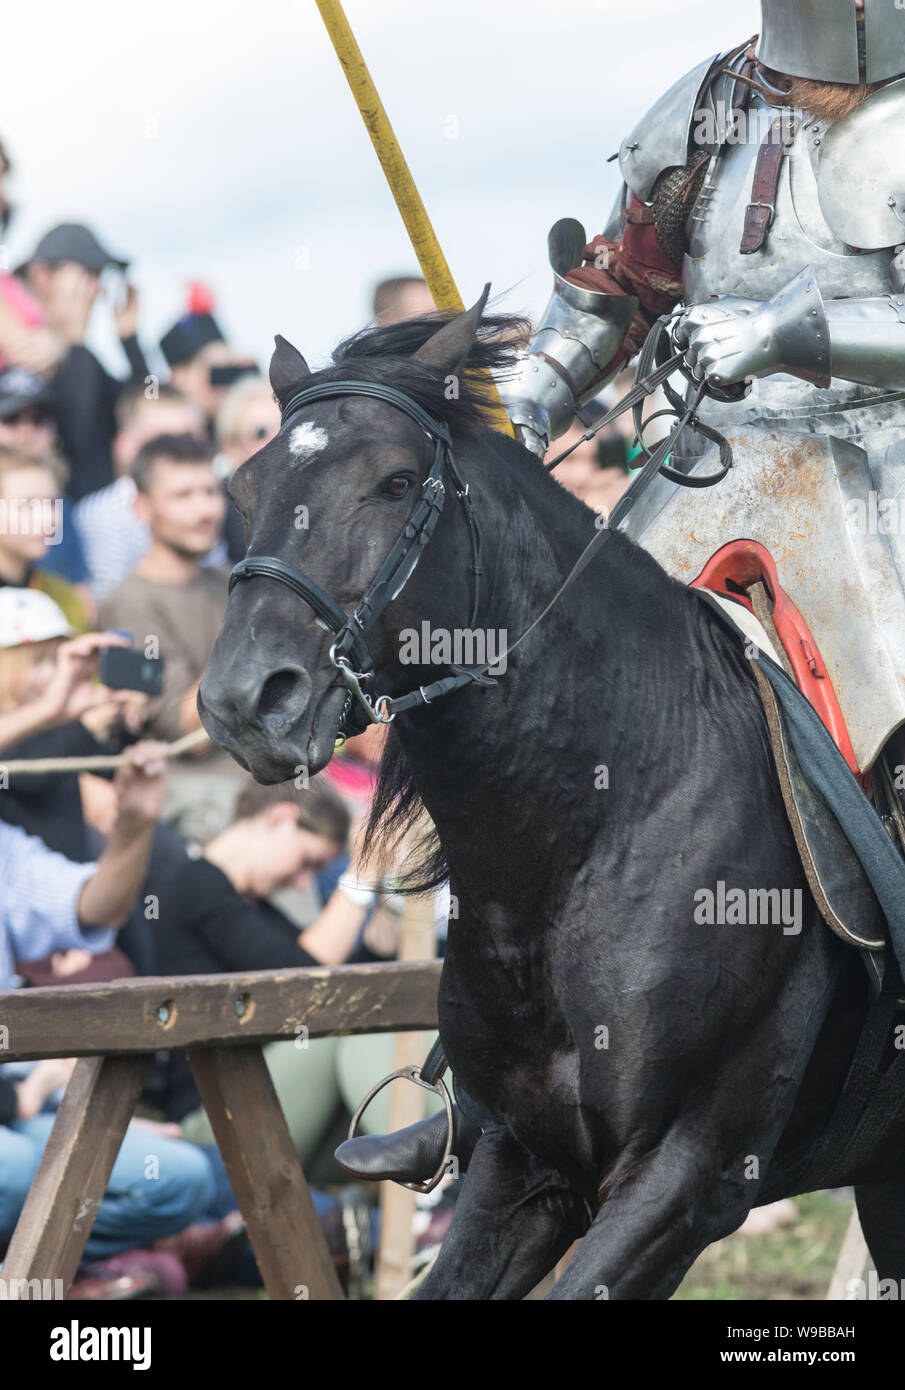 A man knight involved in a fight riding a horse - people watching behind the fence Stock Photo